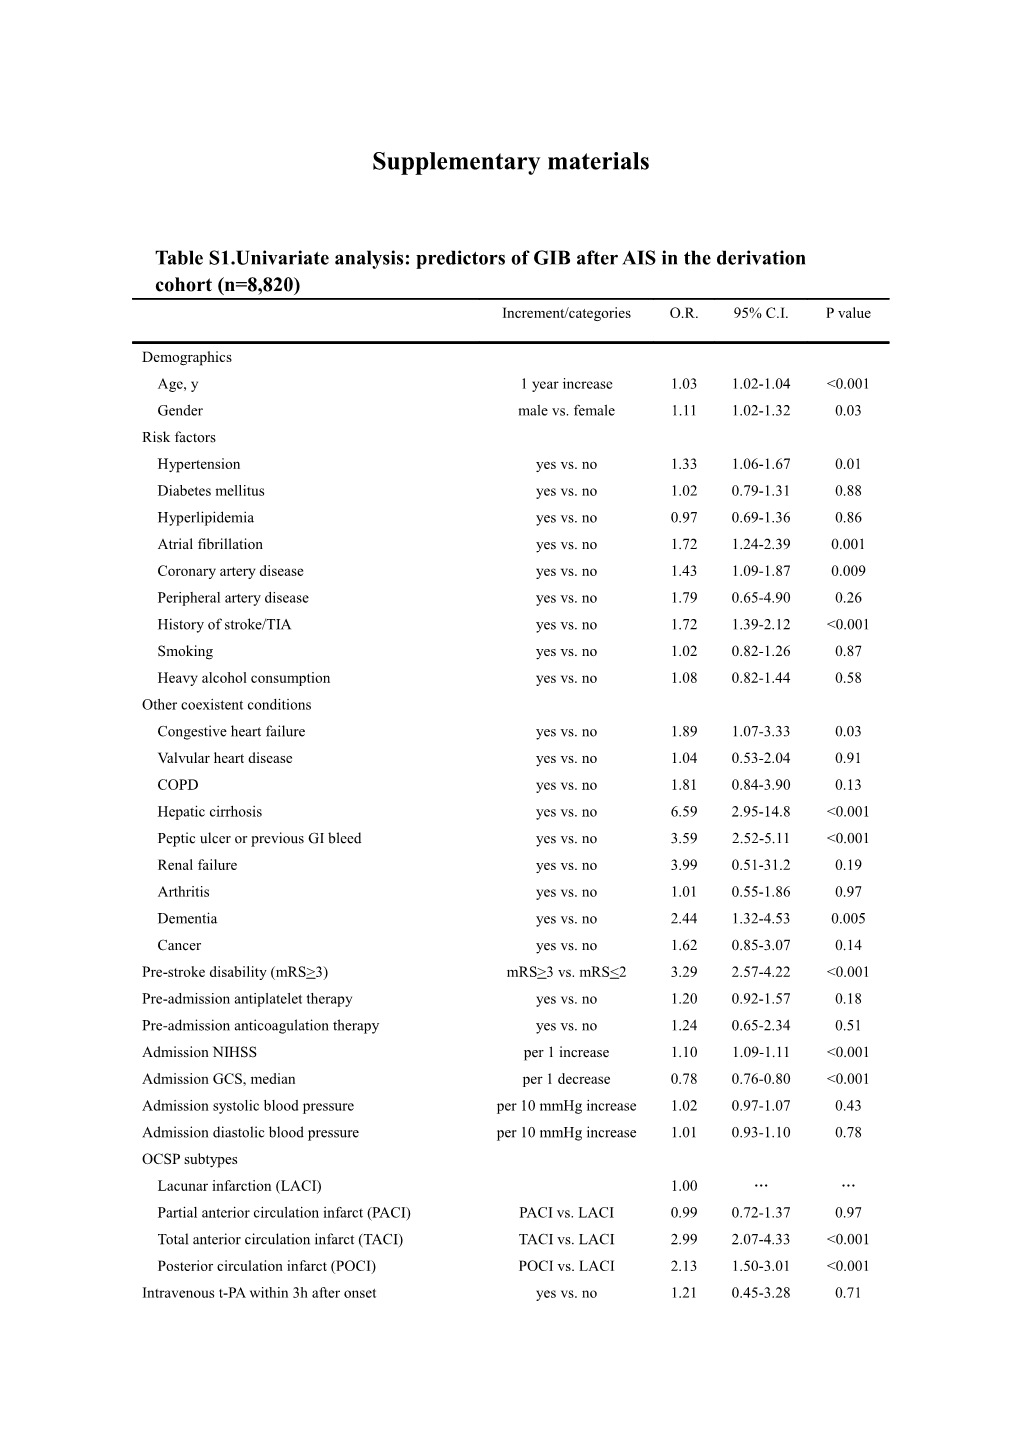 Table S1.Univariate Analysis: Predictors of GIB After AIS in the Derivation Cohort (N=8,820)